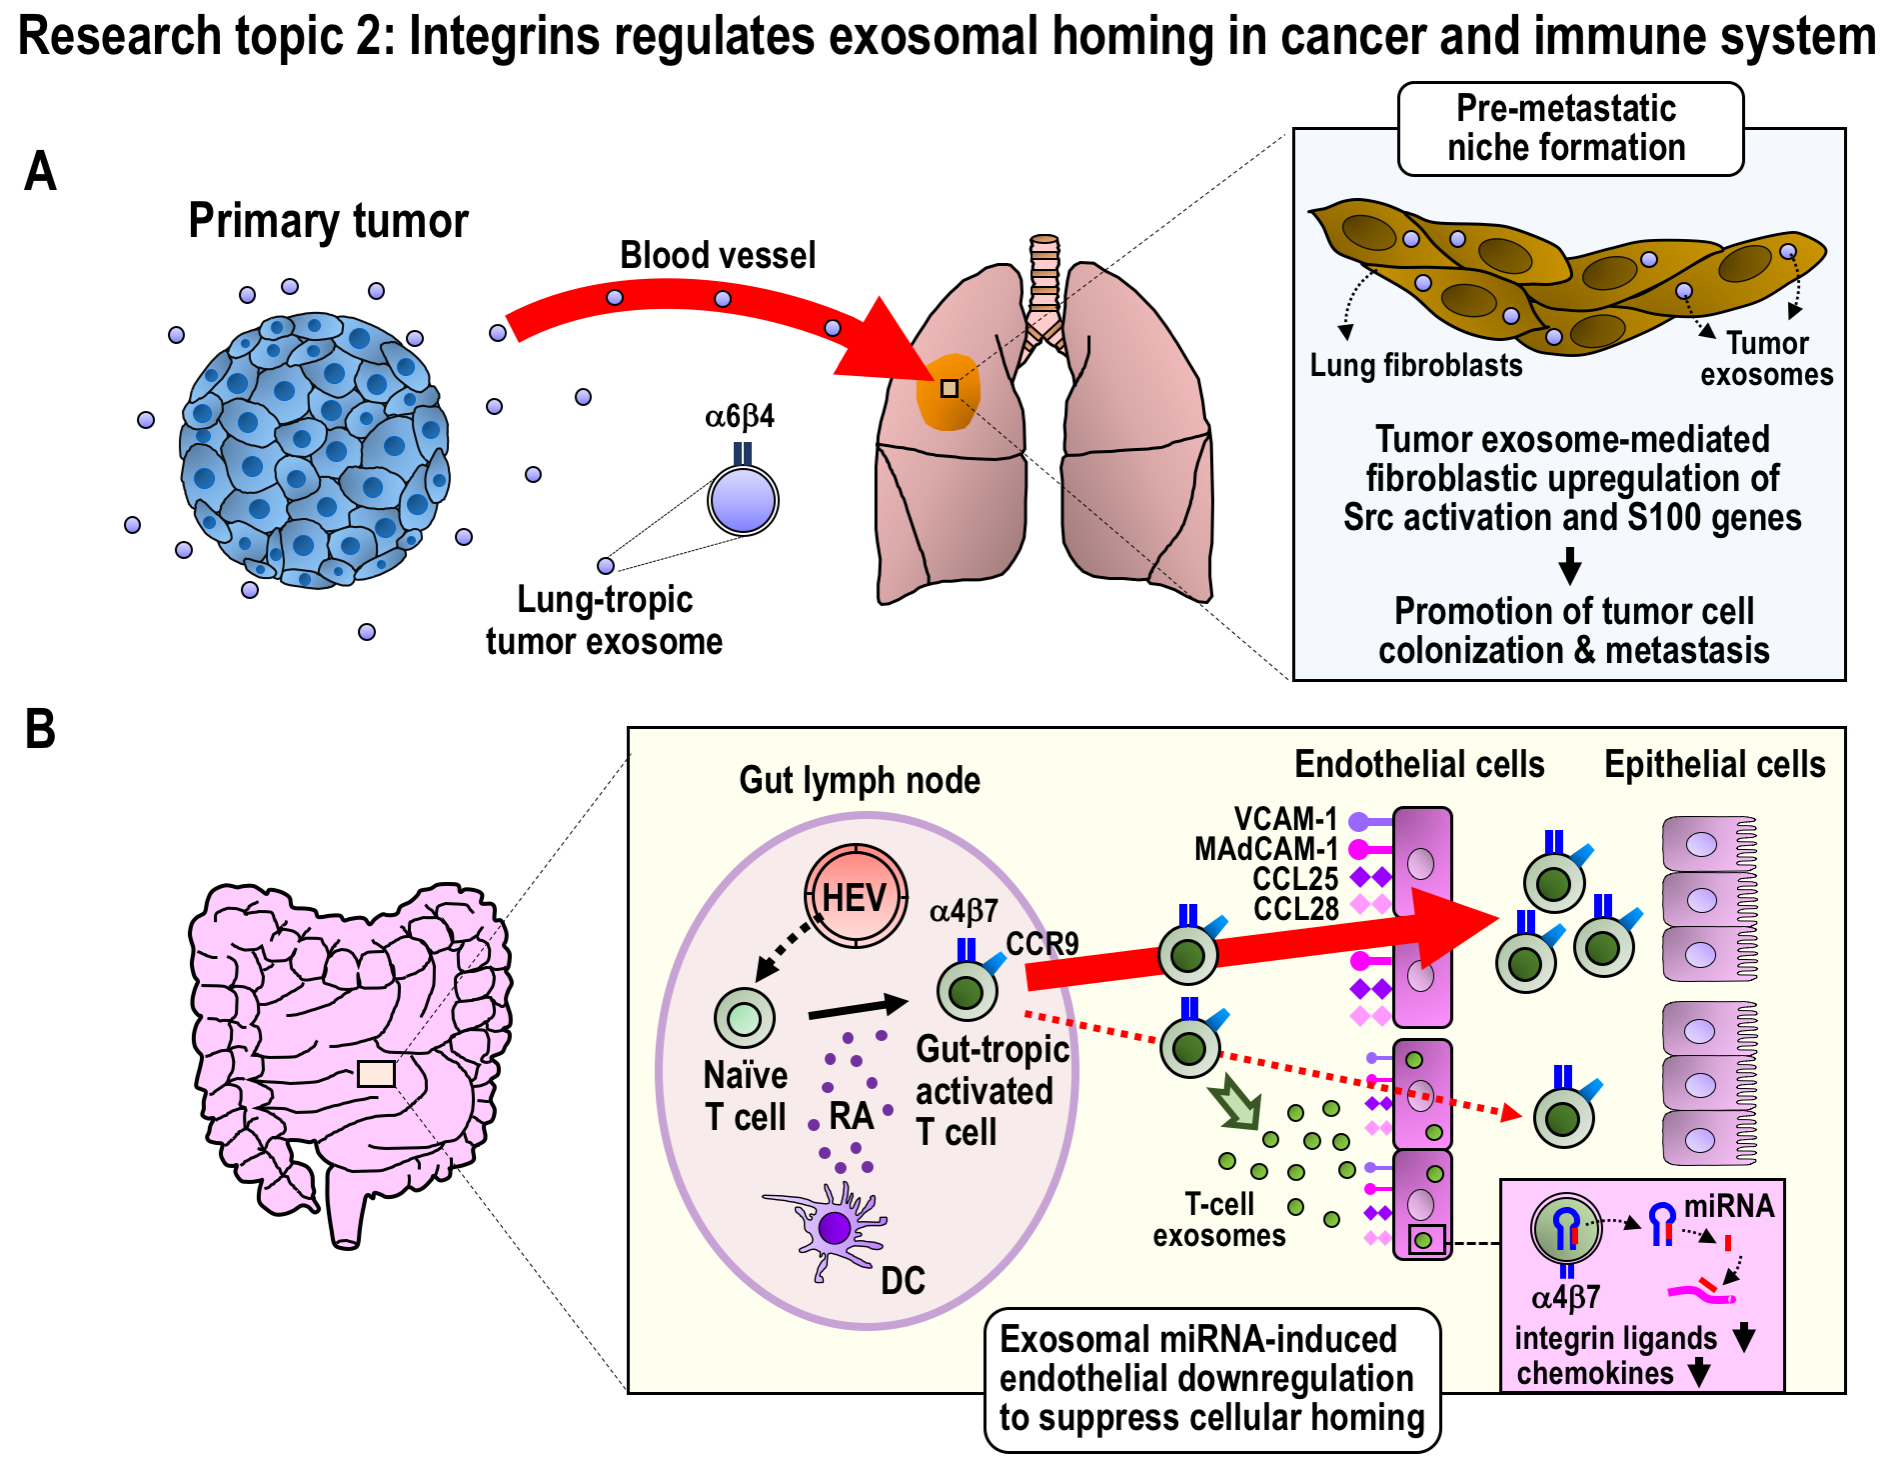 Research topic 2: Integrins regulates exosomal homing in cancer and immune system